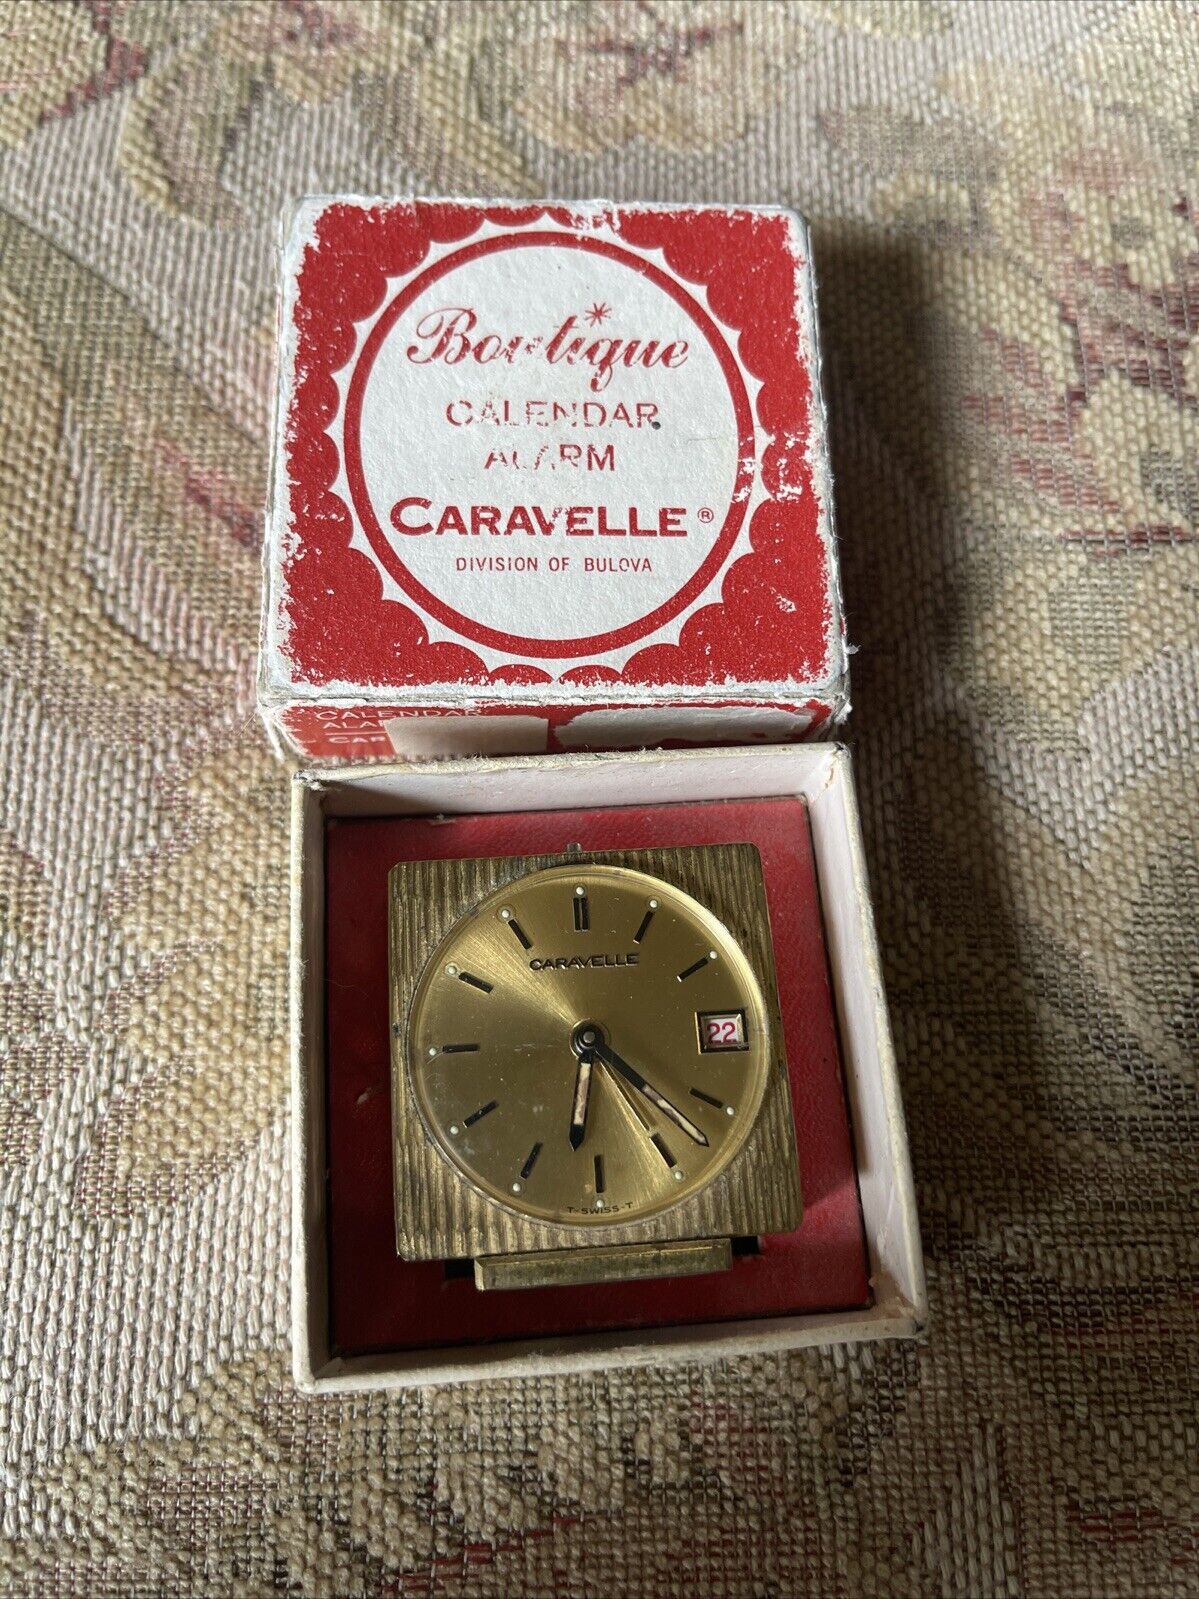 Vintage Swiss Caravelle Division Of Bulova Mini Alarm Clock, 7 Jewels And Date